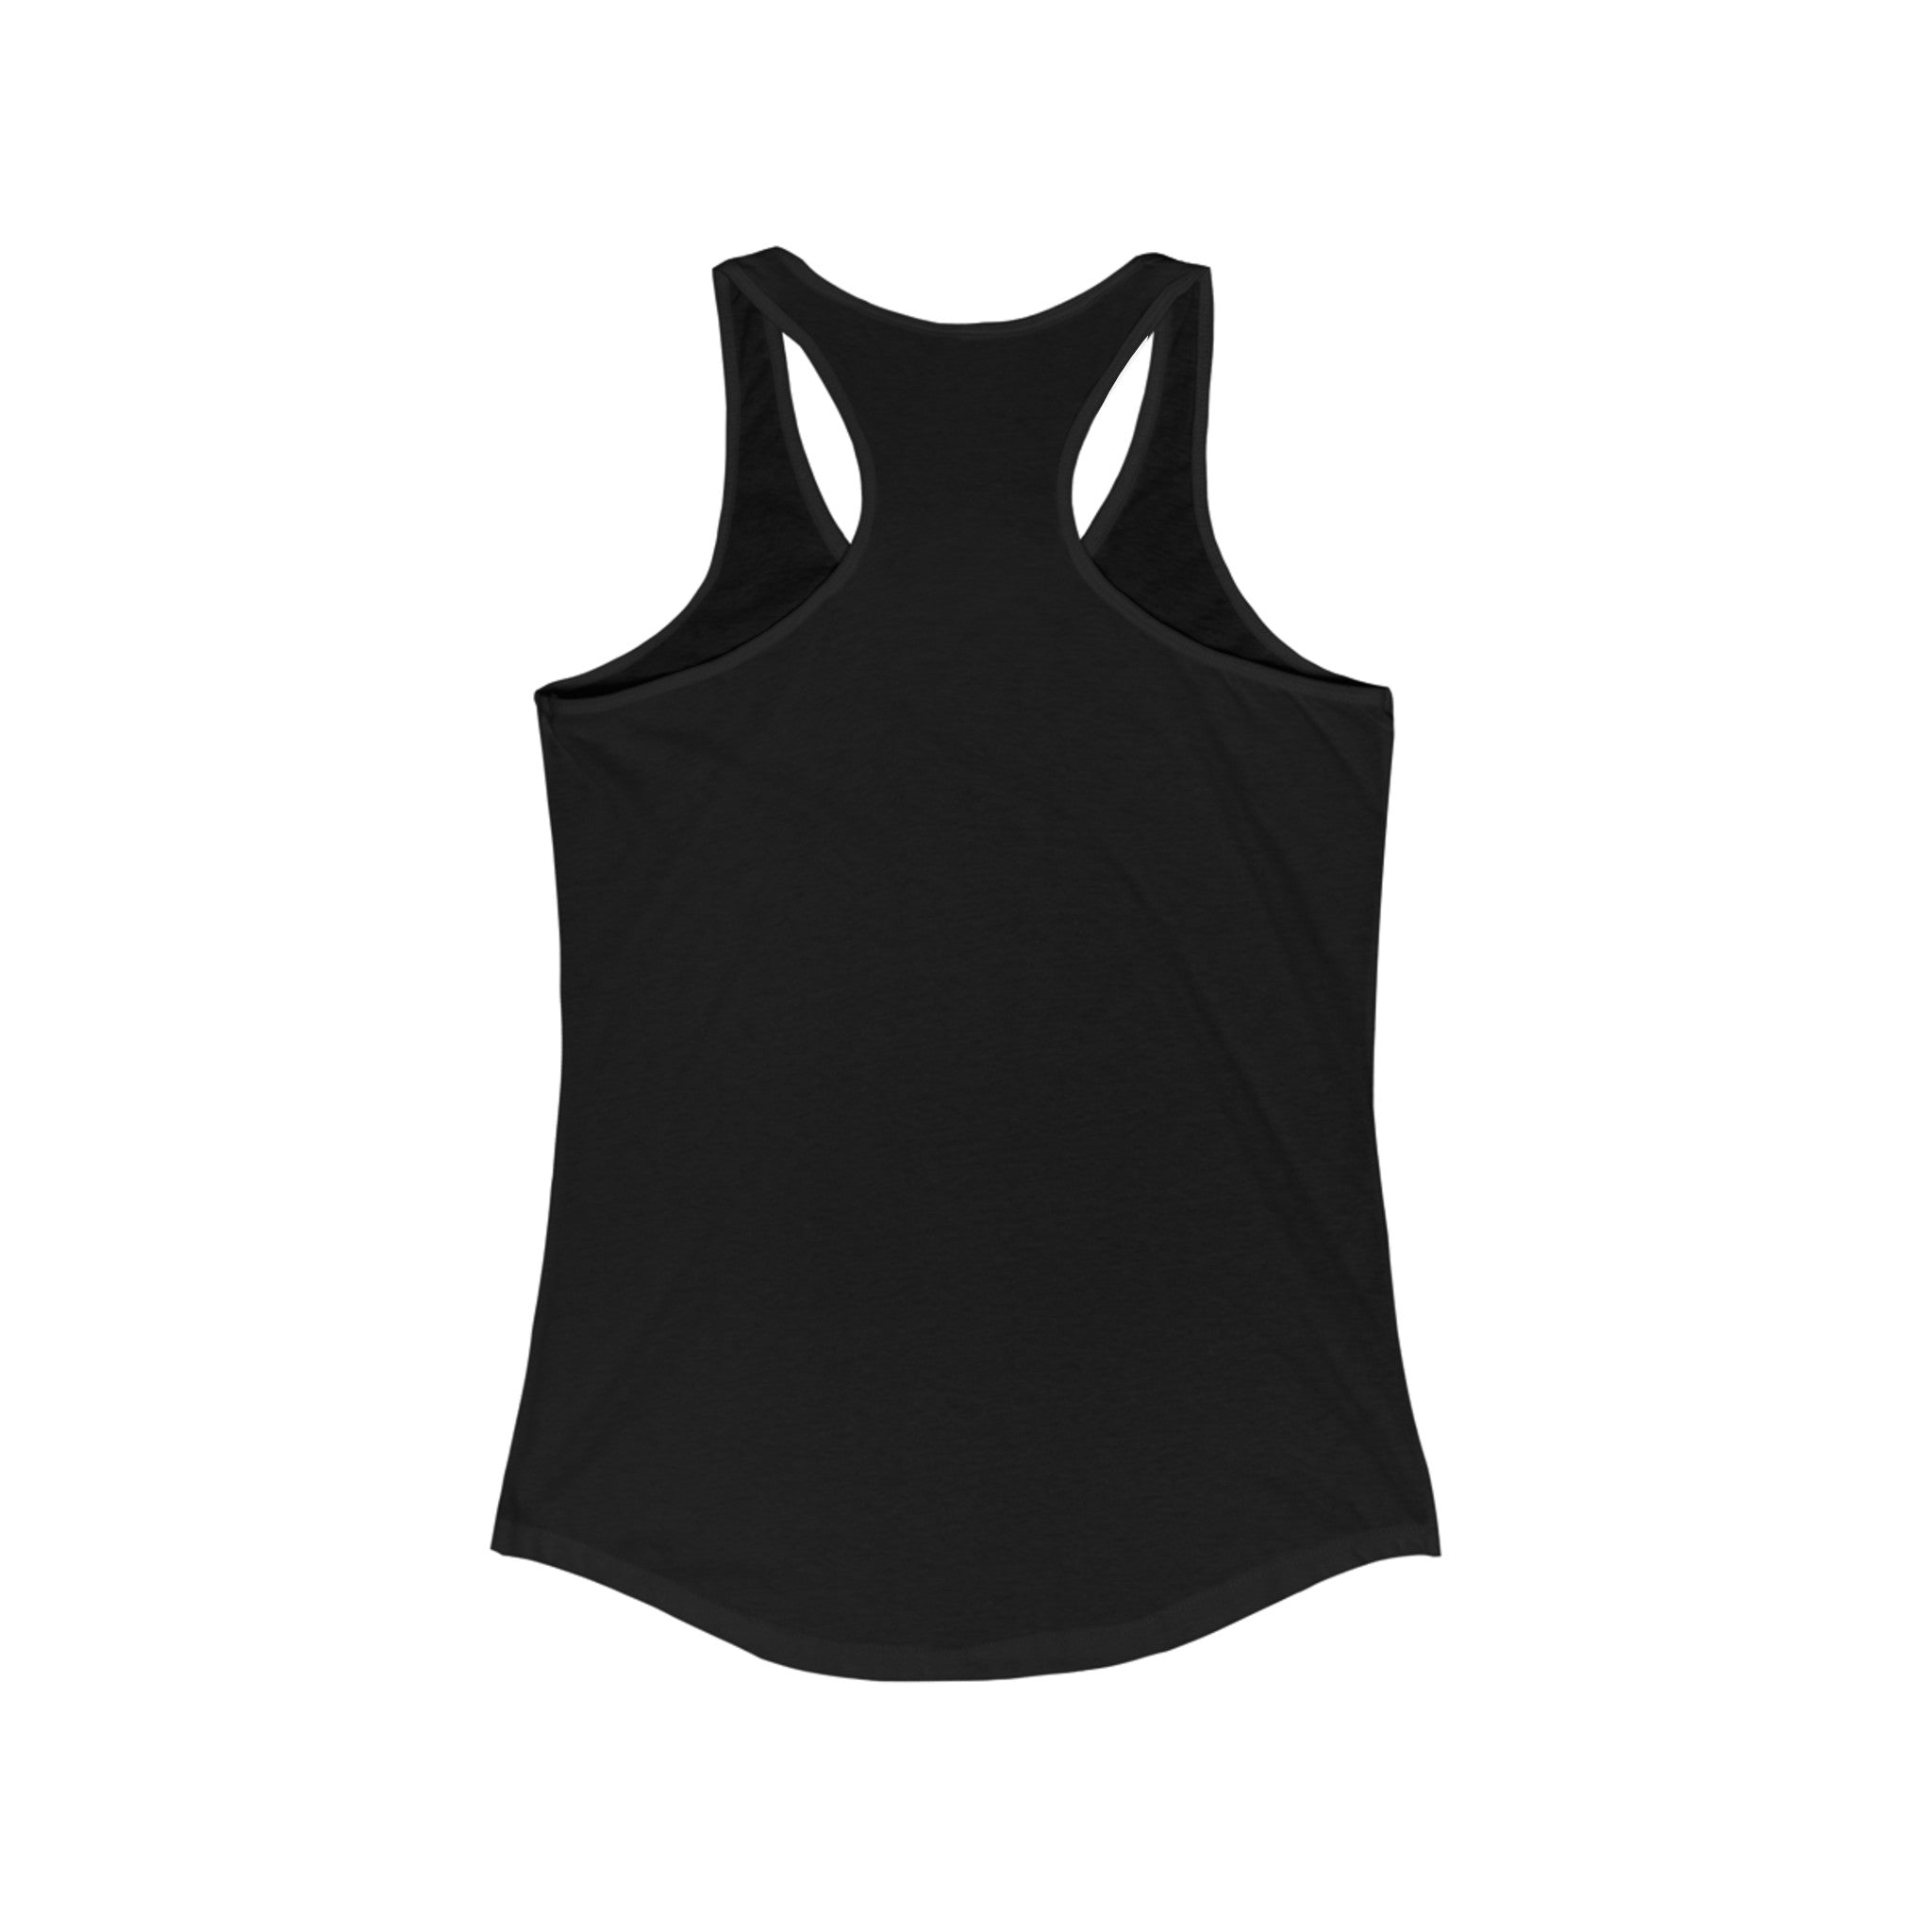 A lightweight HERO - Women's Racerback Tank, displayed flat against a white background, showcasing its sleek back design, perfect for active lifestyles.